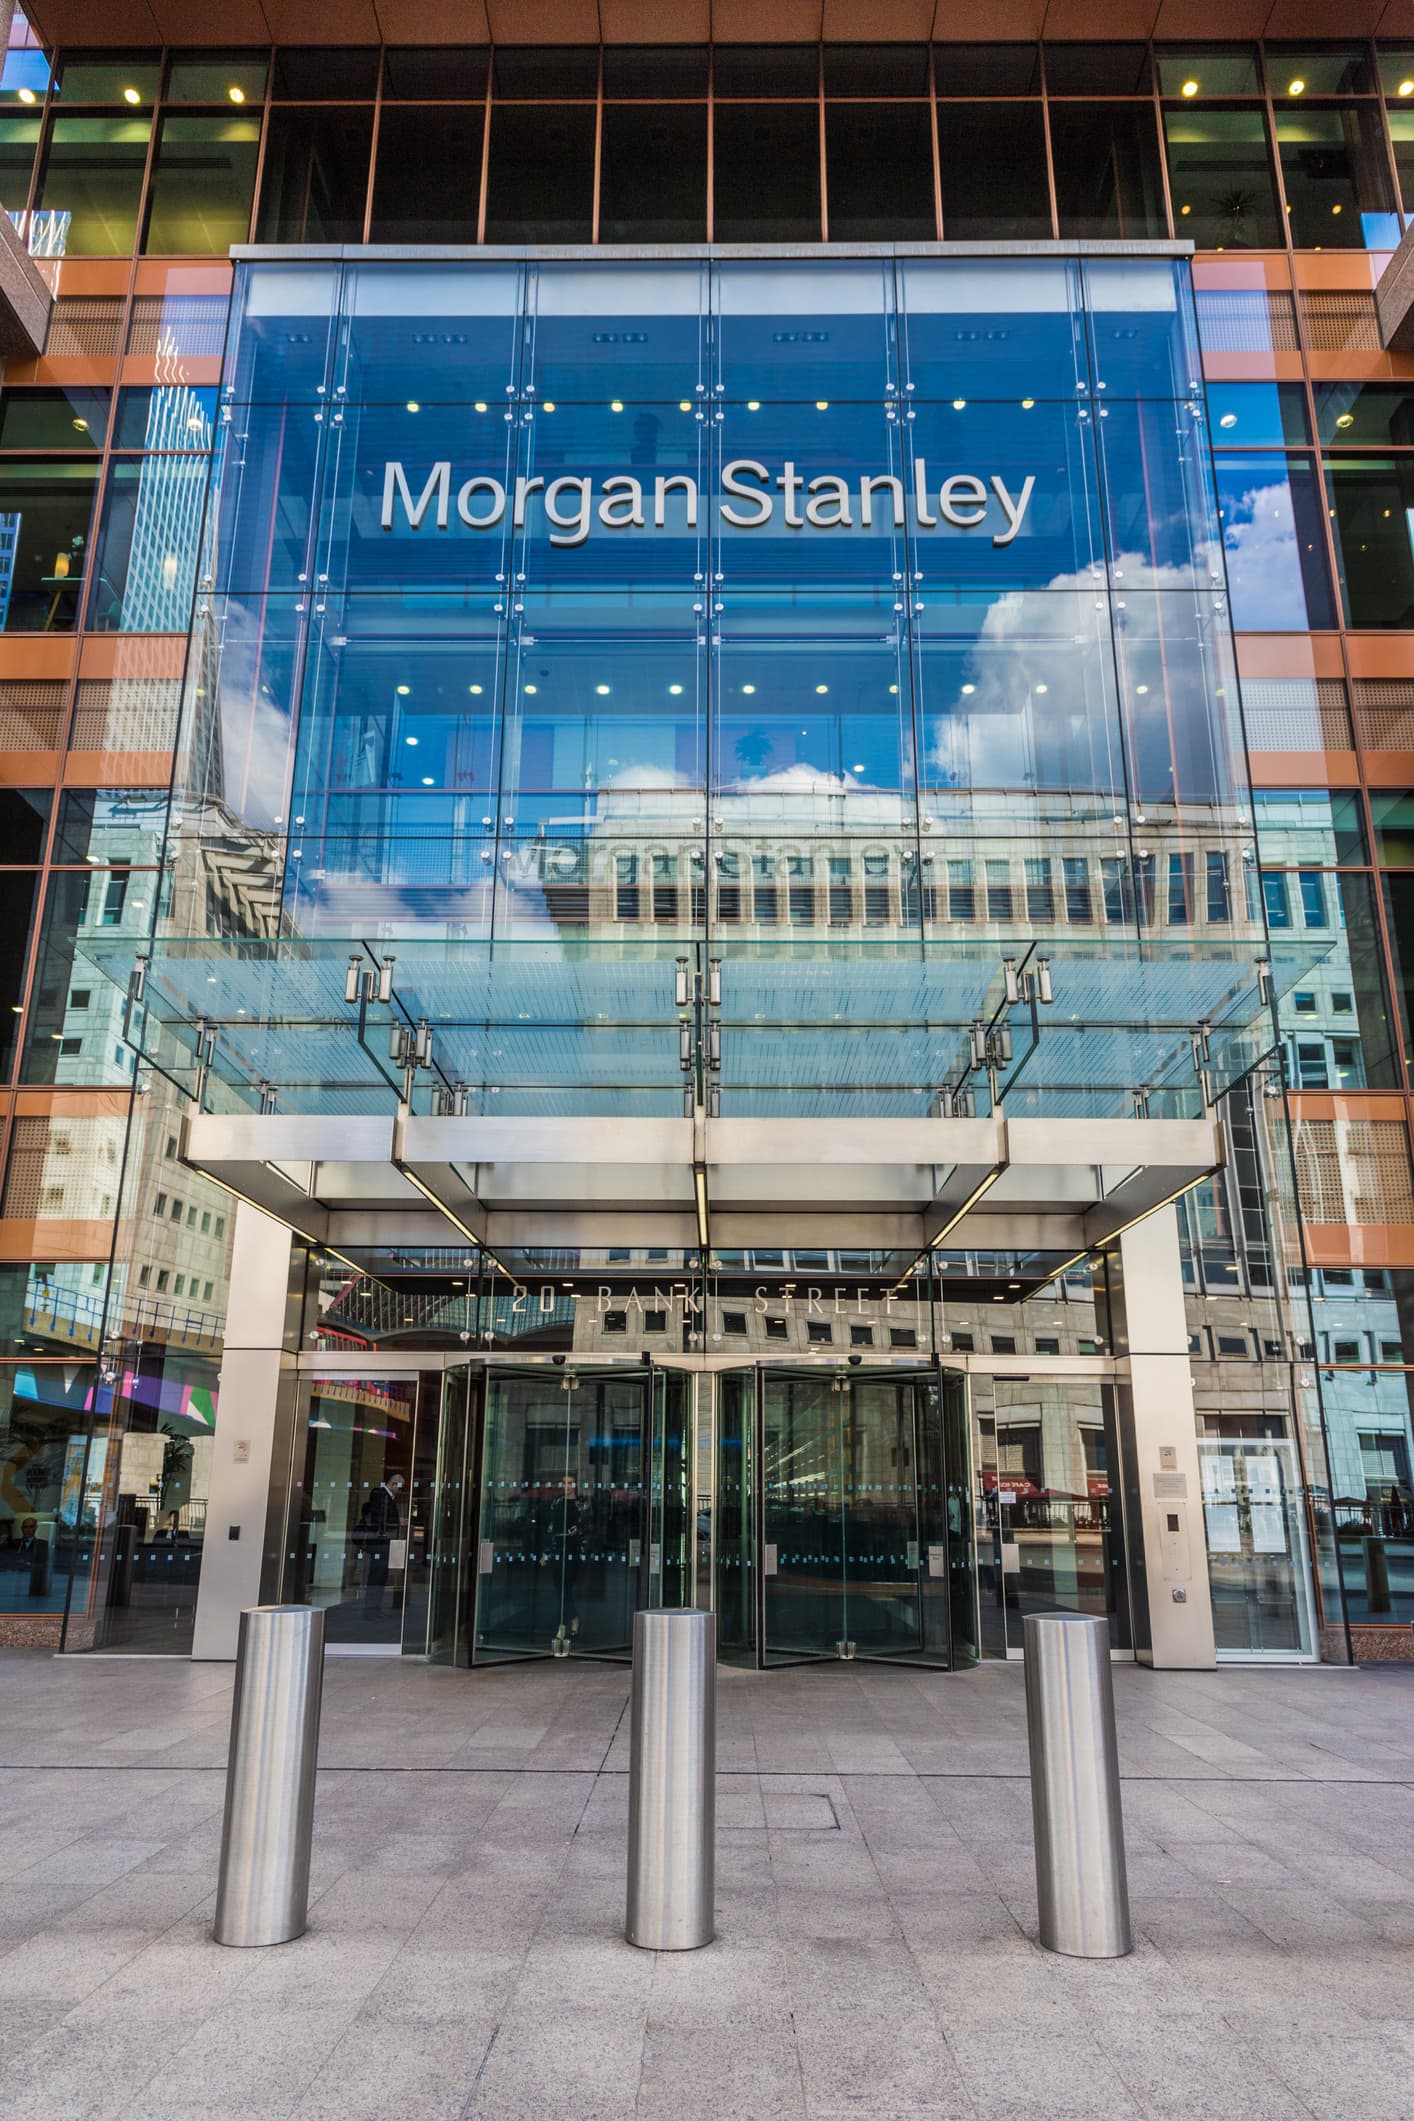 Morgan Stanley is the first large American bank to offer wealthy customers access to bitcoin funds